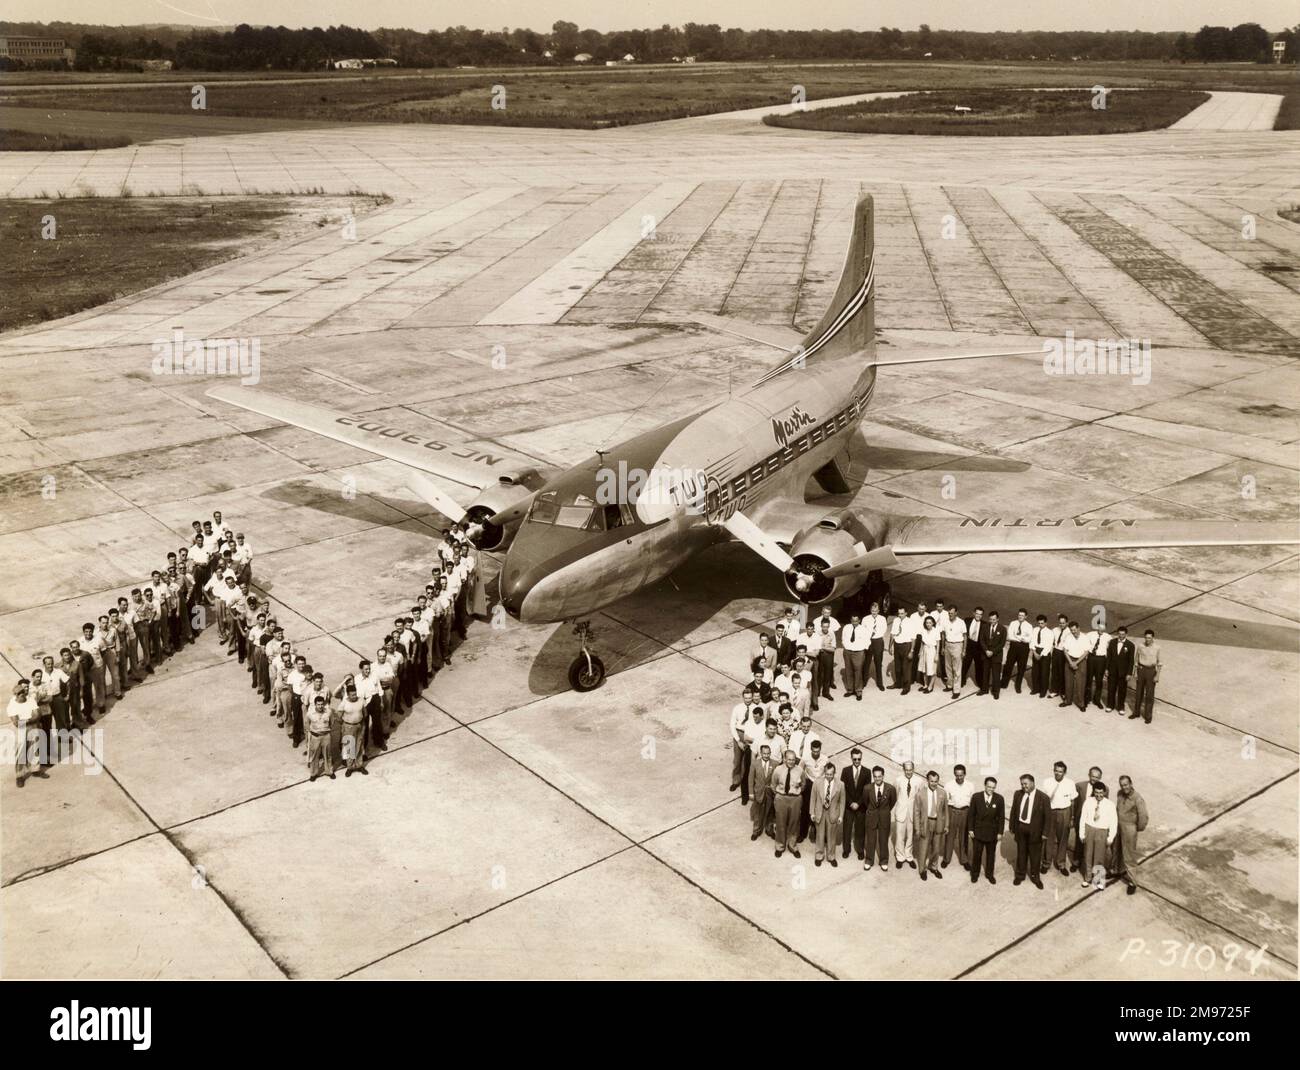 Martin 2-0-2, NC 93002. The 2-0-2 was the first post-war twin-engined airliner to receive Civil Aeronautics Administration certification, an NC license on 13 August 1947. Airline and Martin employees form a symbolic NC in front of the first licensed 2-0-2. Stock Photo